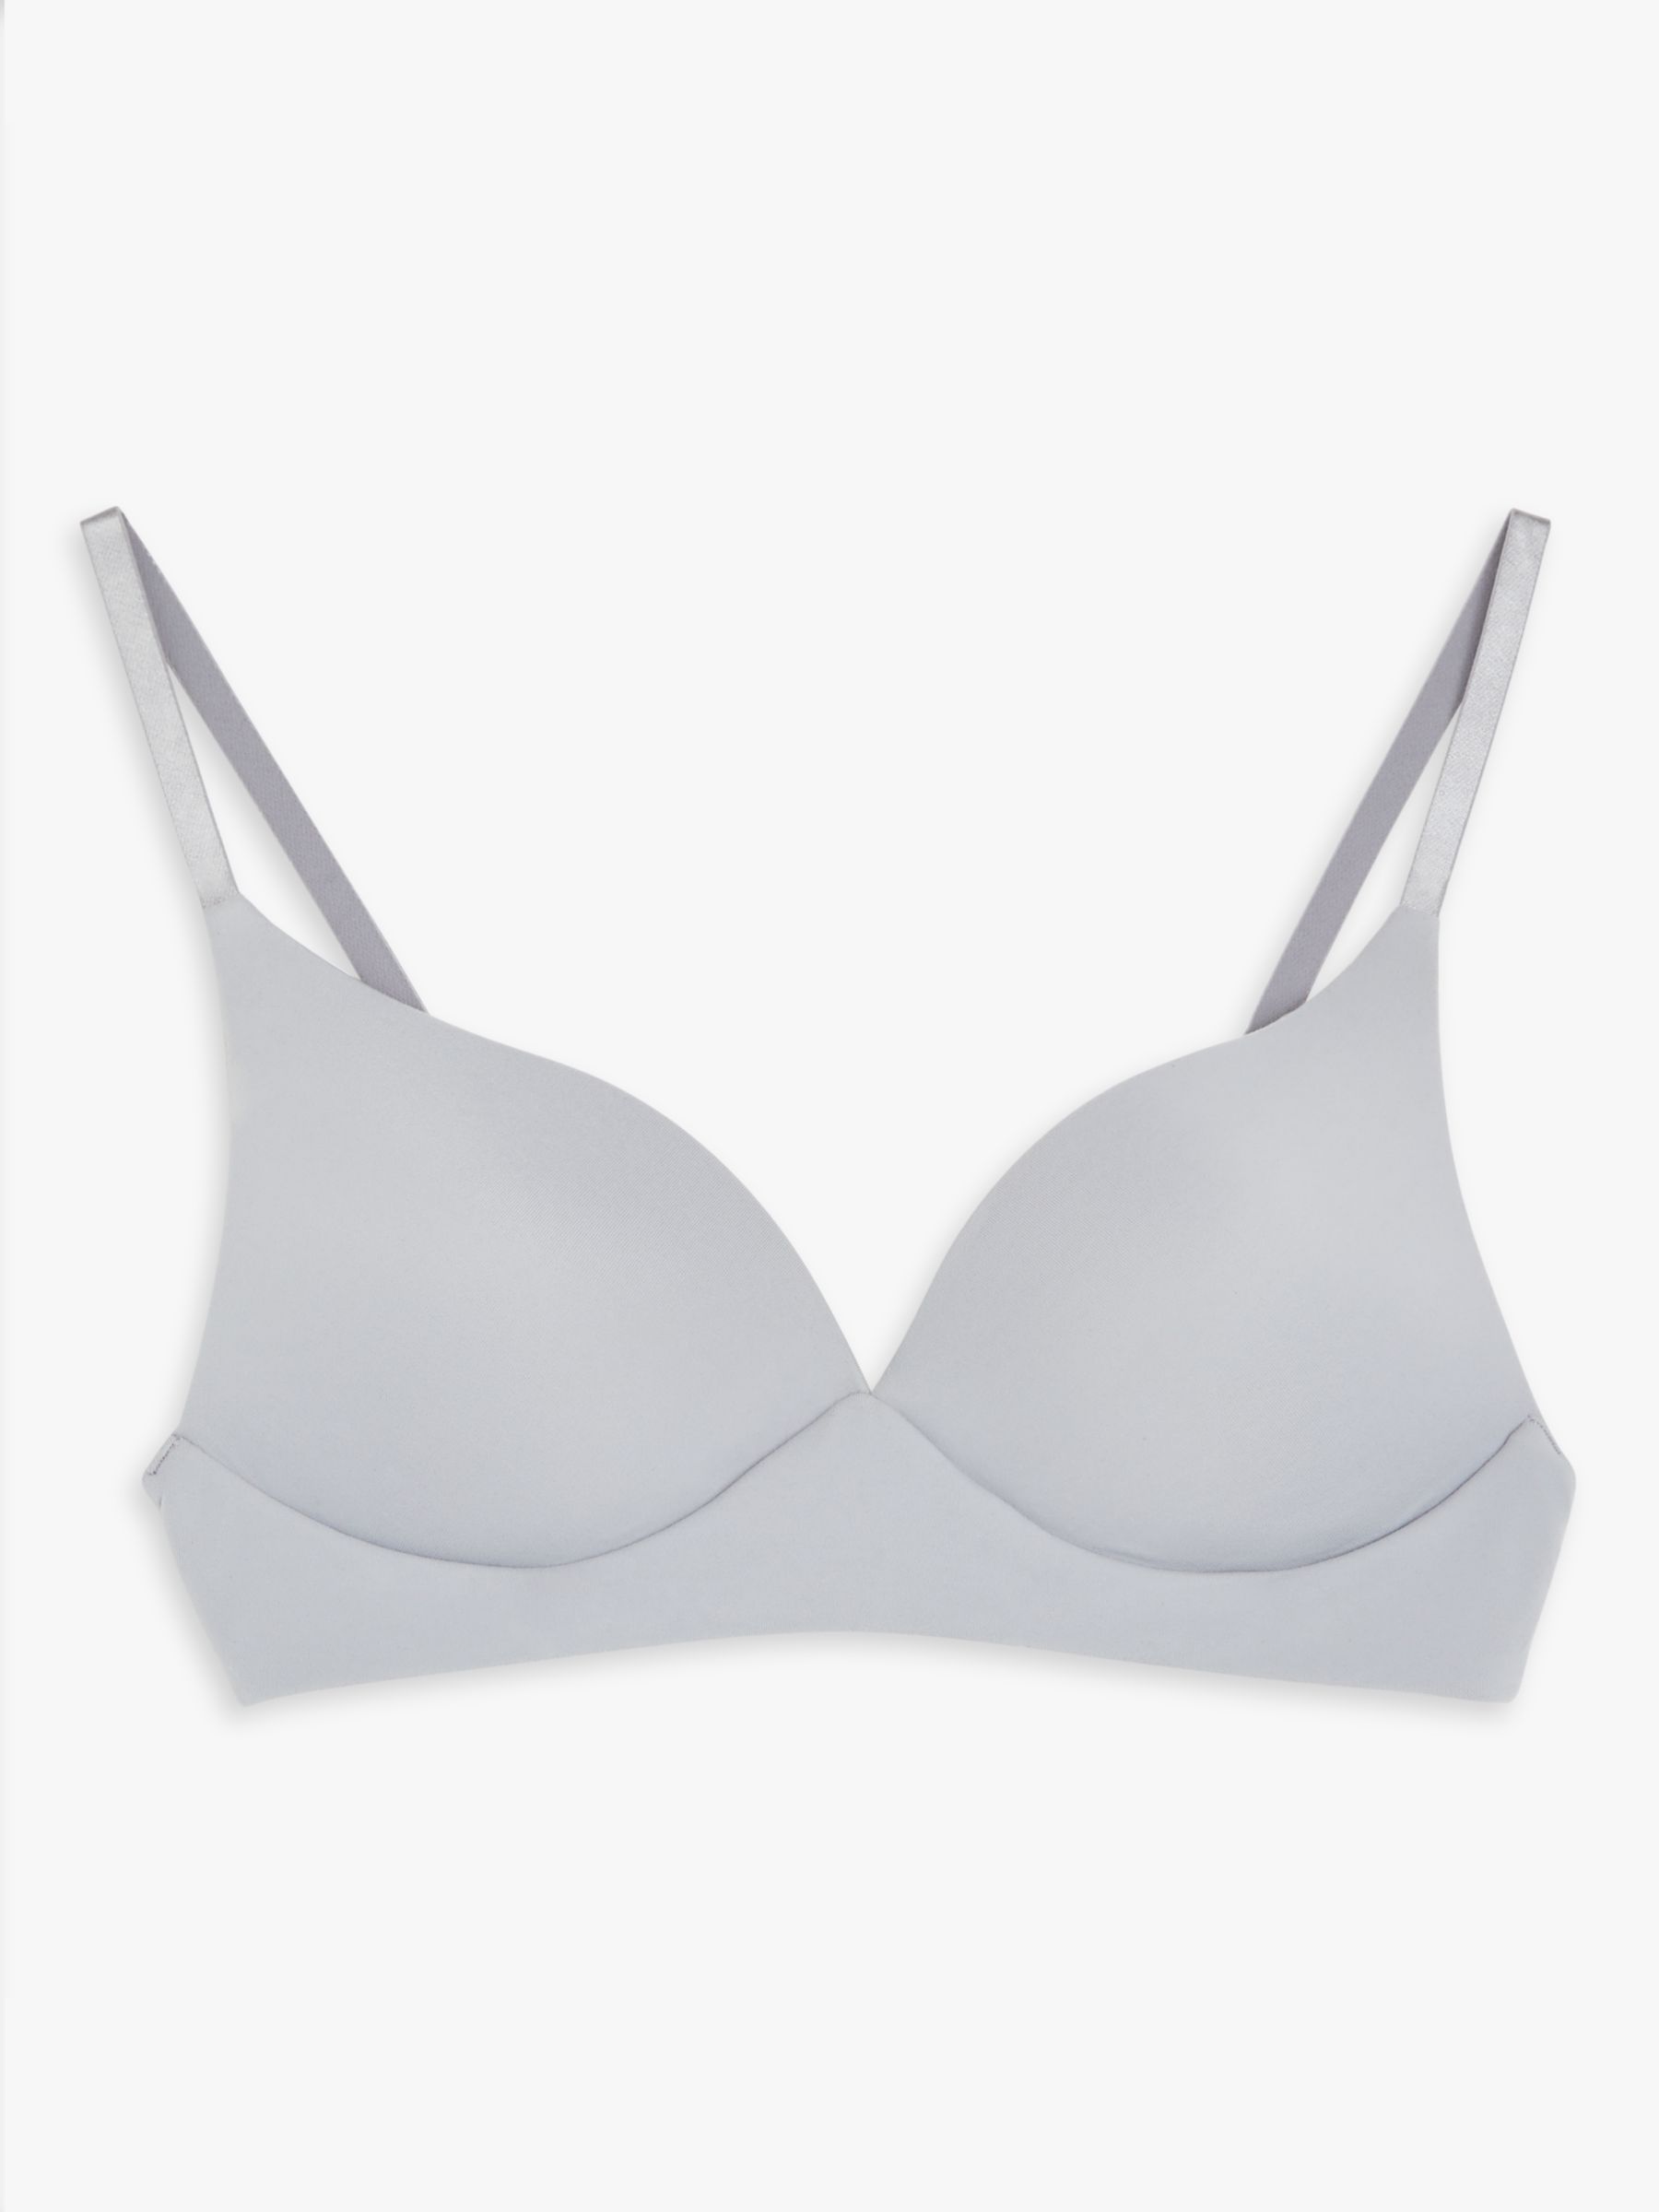 John Lewis ANYDAY Willow Non-Wired Bra, Grey at John Lewis & Partners